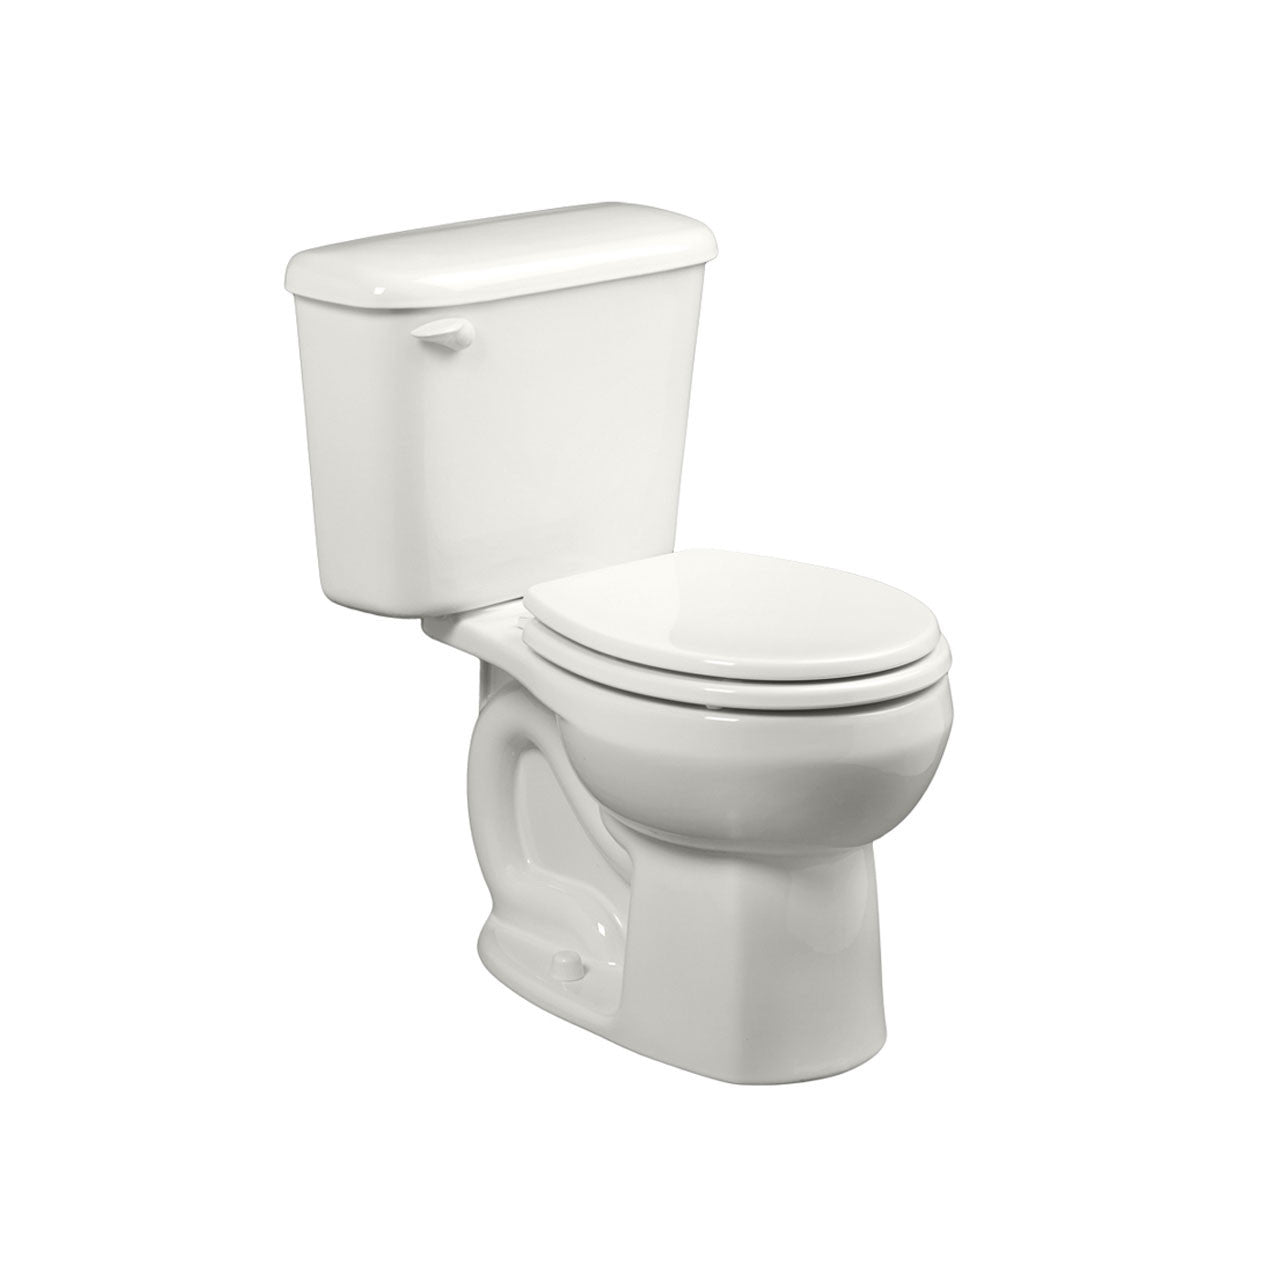 Bathroom Toilet - Round at Wholesale Pricing